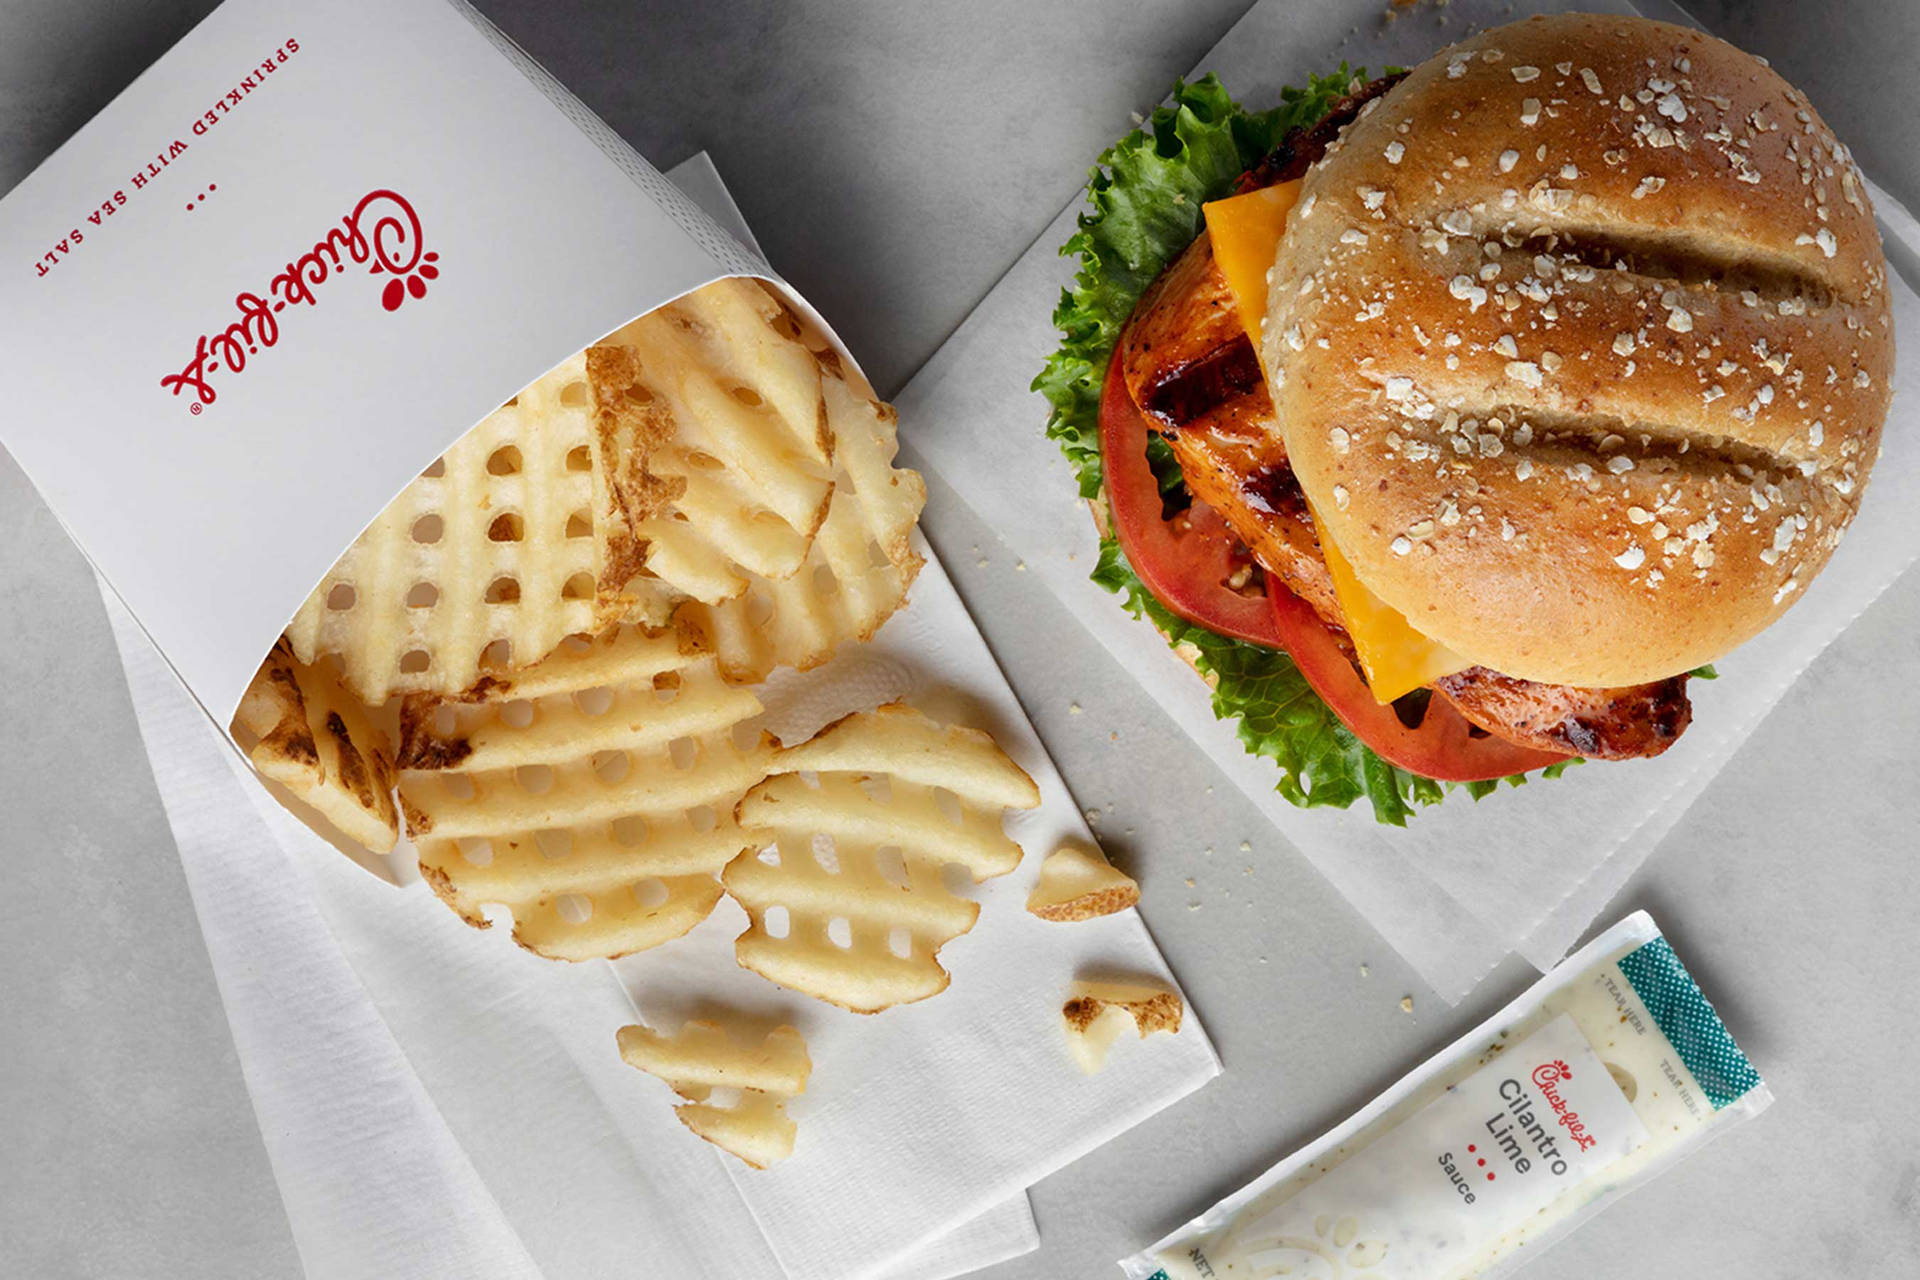 Savor The Taste With Chick-fil-a's Deluxe Meal